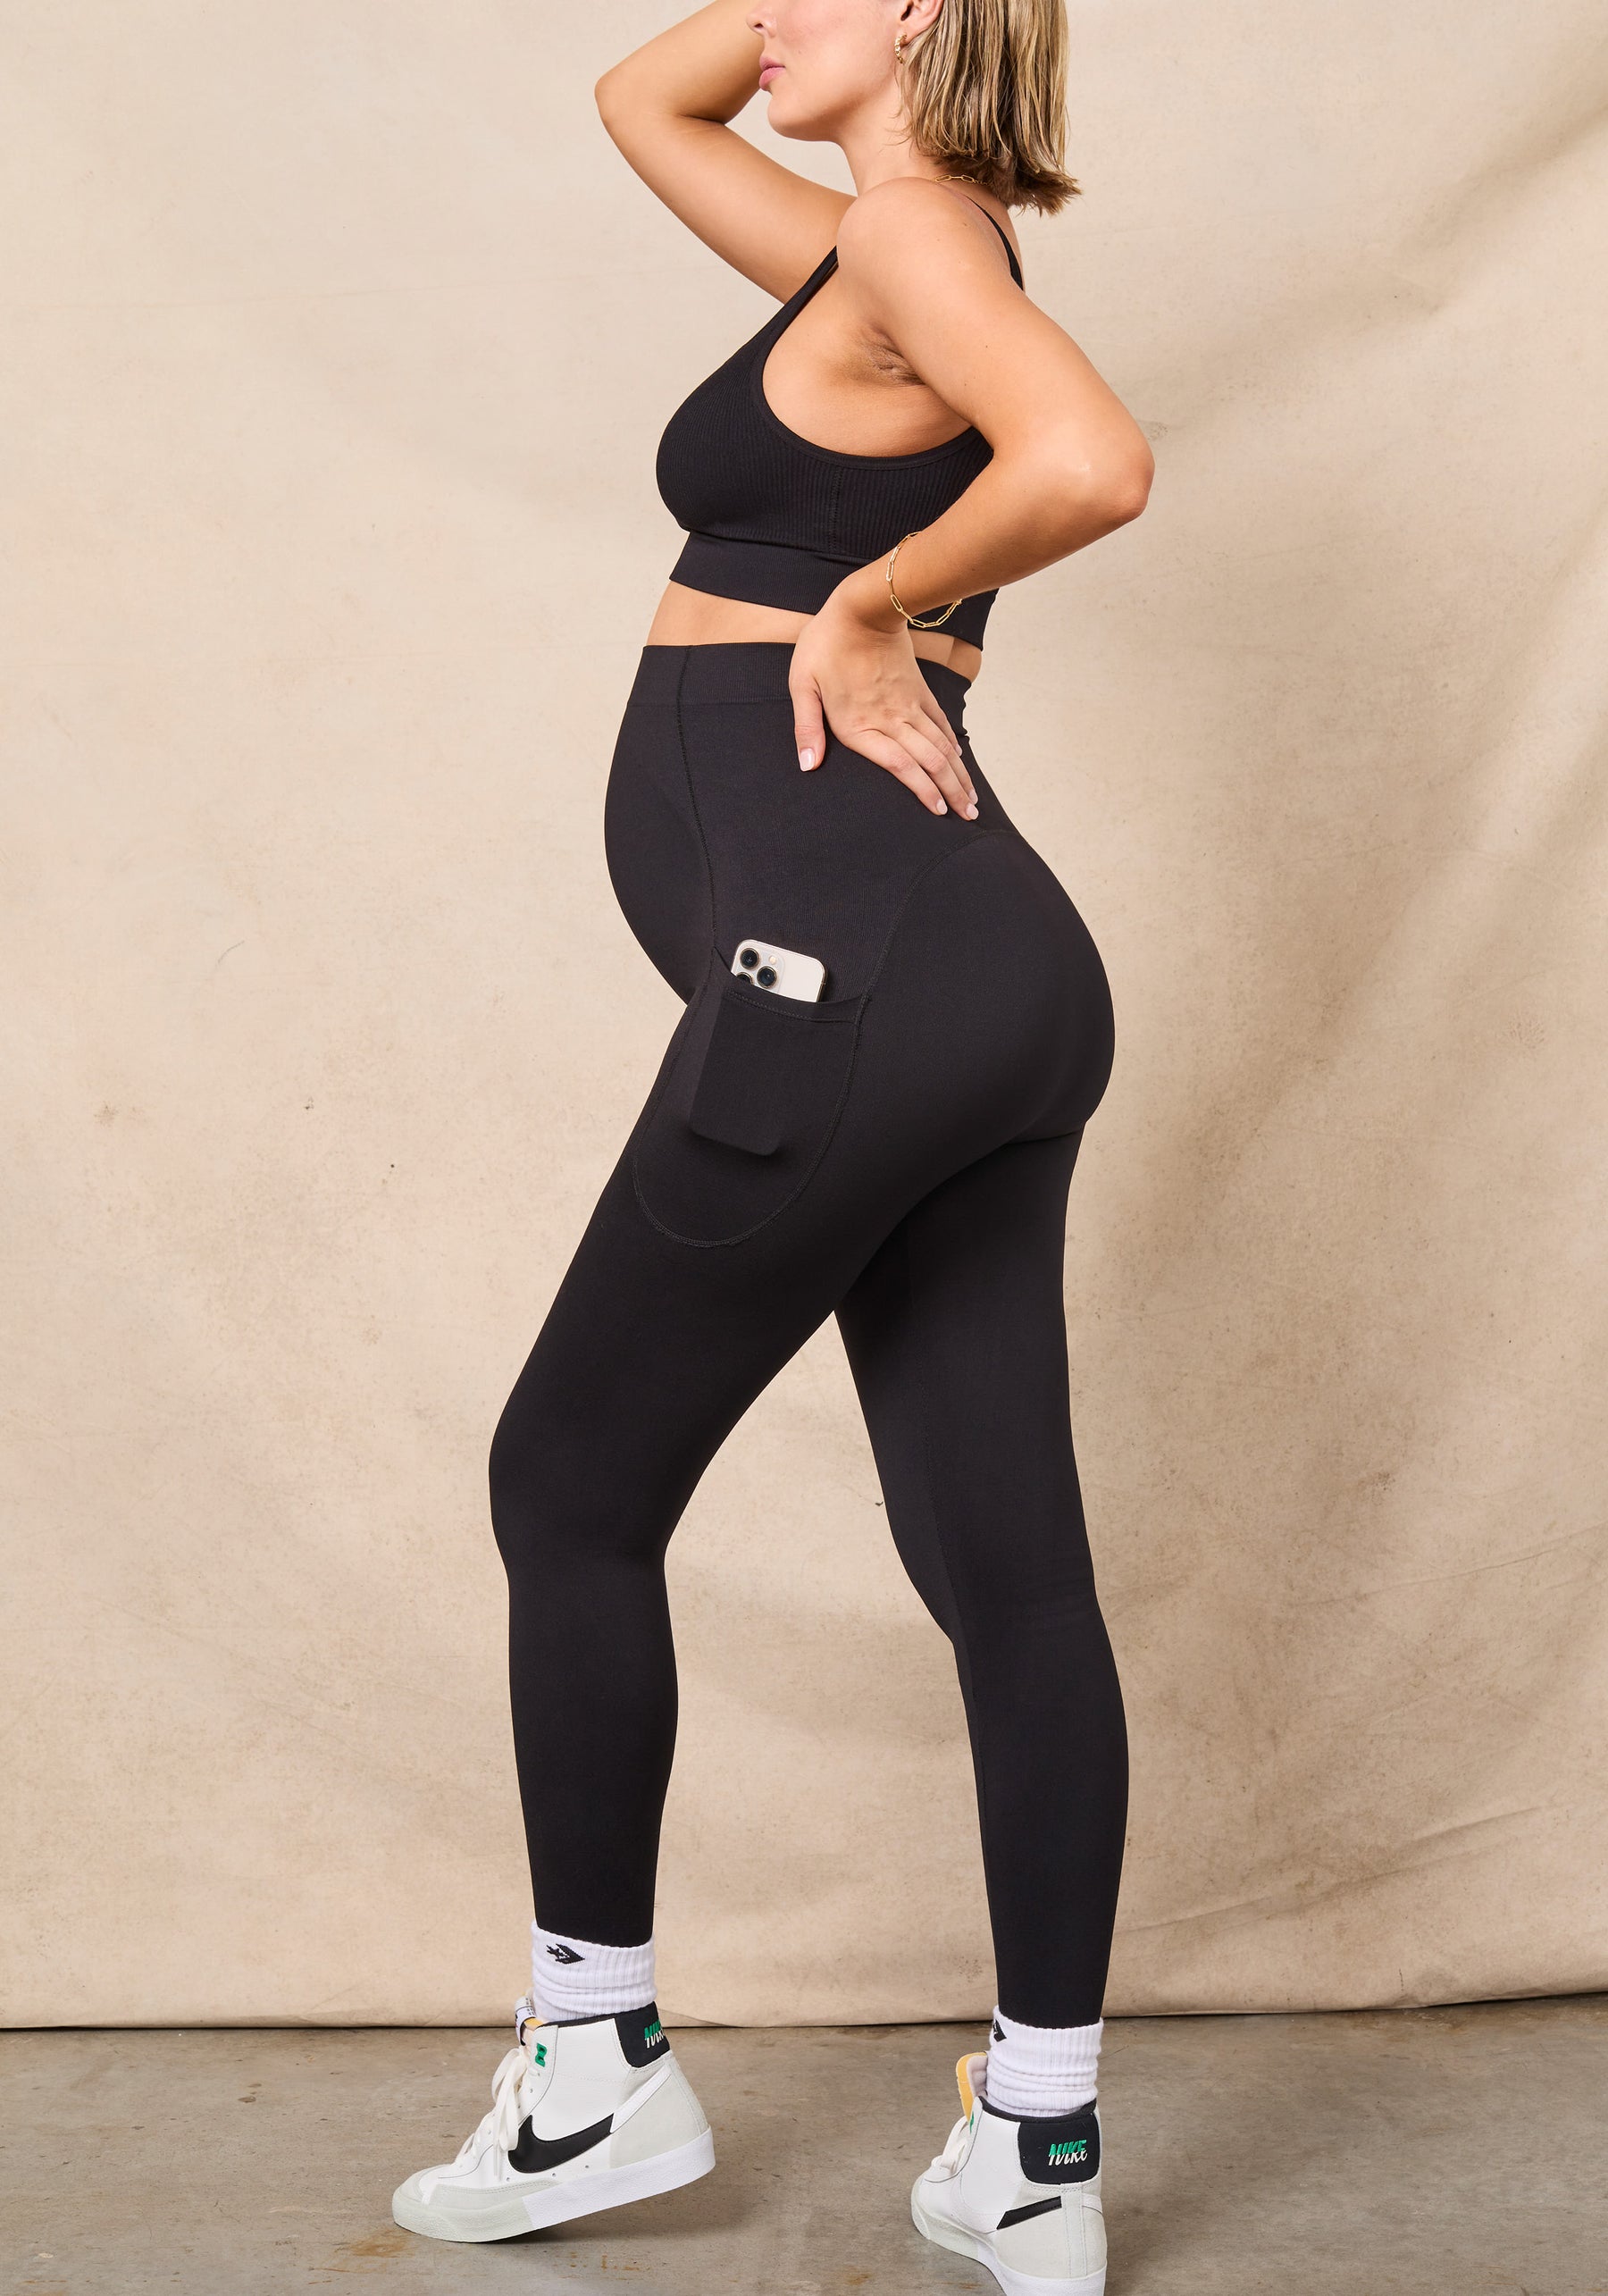 JOYSPELS Maternity Leggings Over The Belly with Pockets Non-See